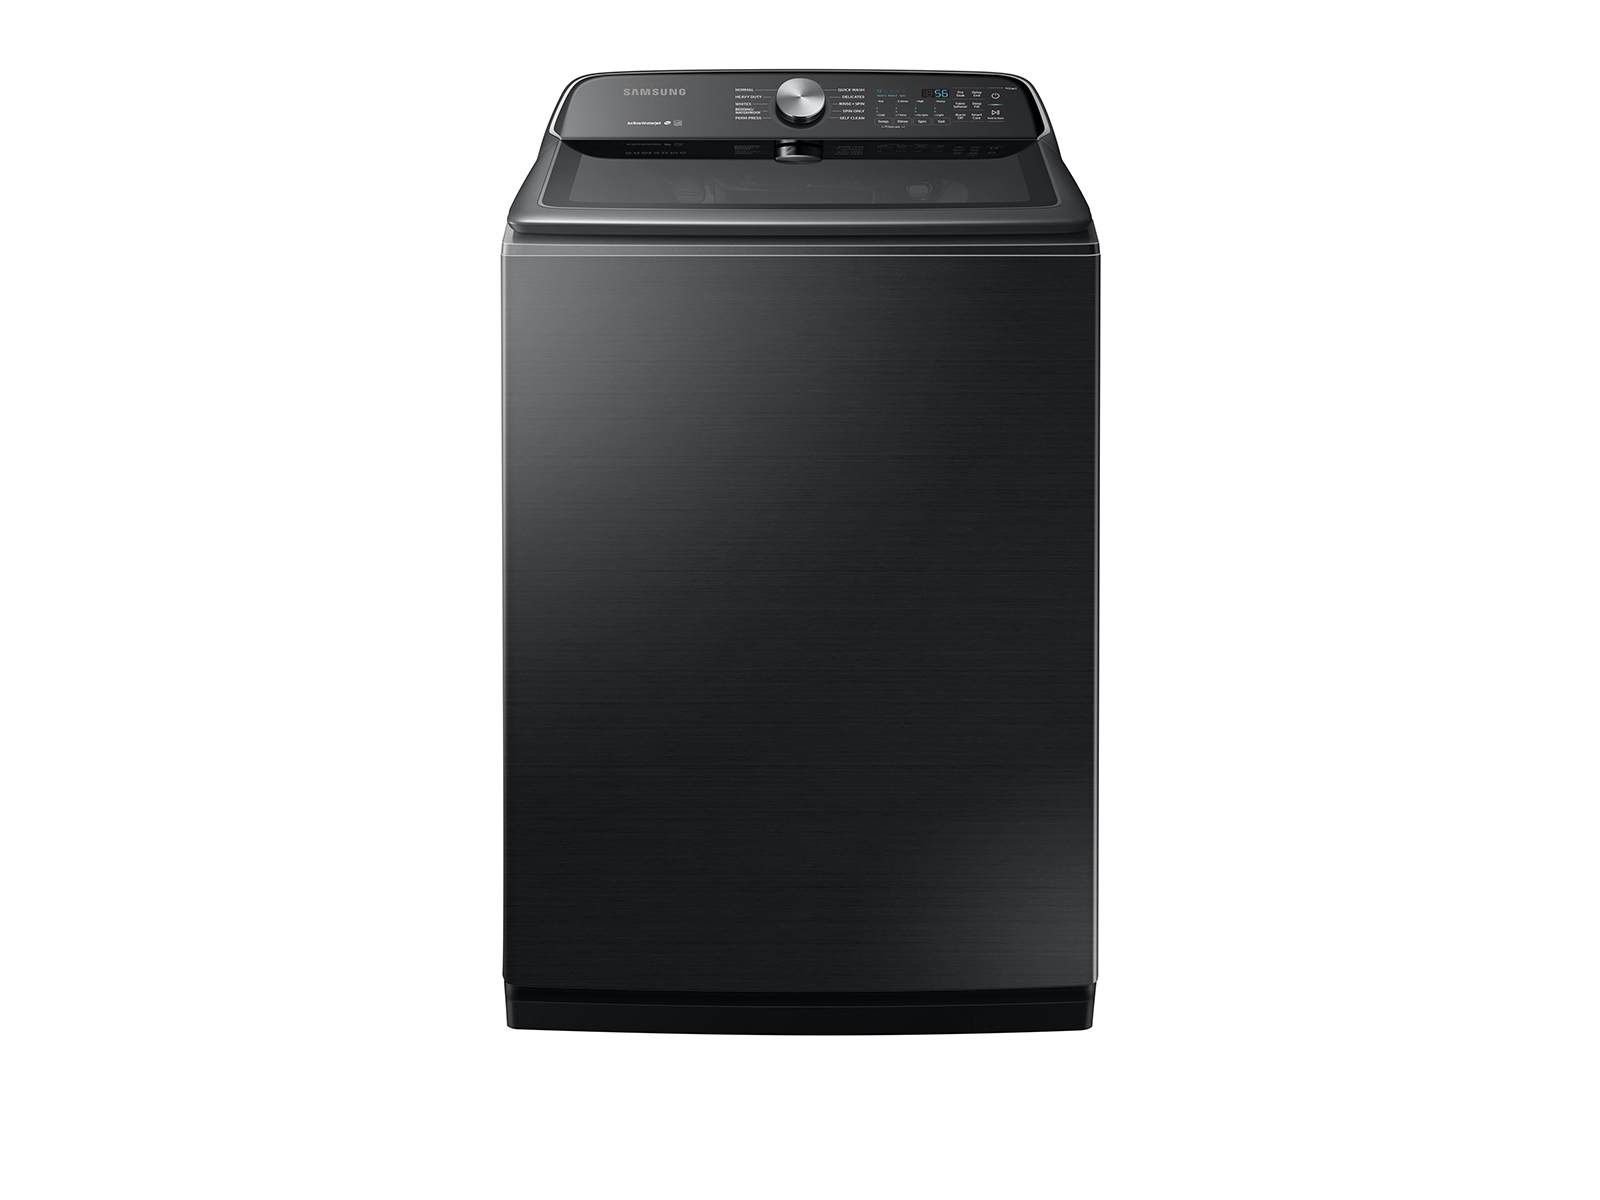 Samsung WA7200 5.4 cu. ft. Top Load Washer with Active WaterJet in Black Stainless Steel(WA54R7200AV/US)